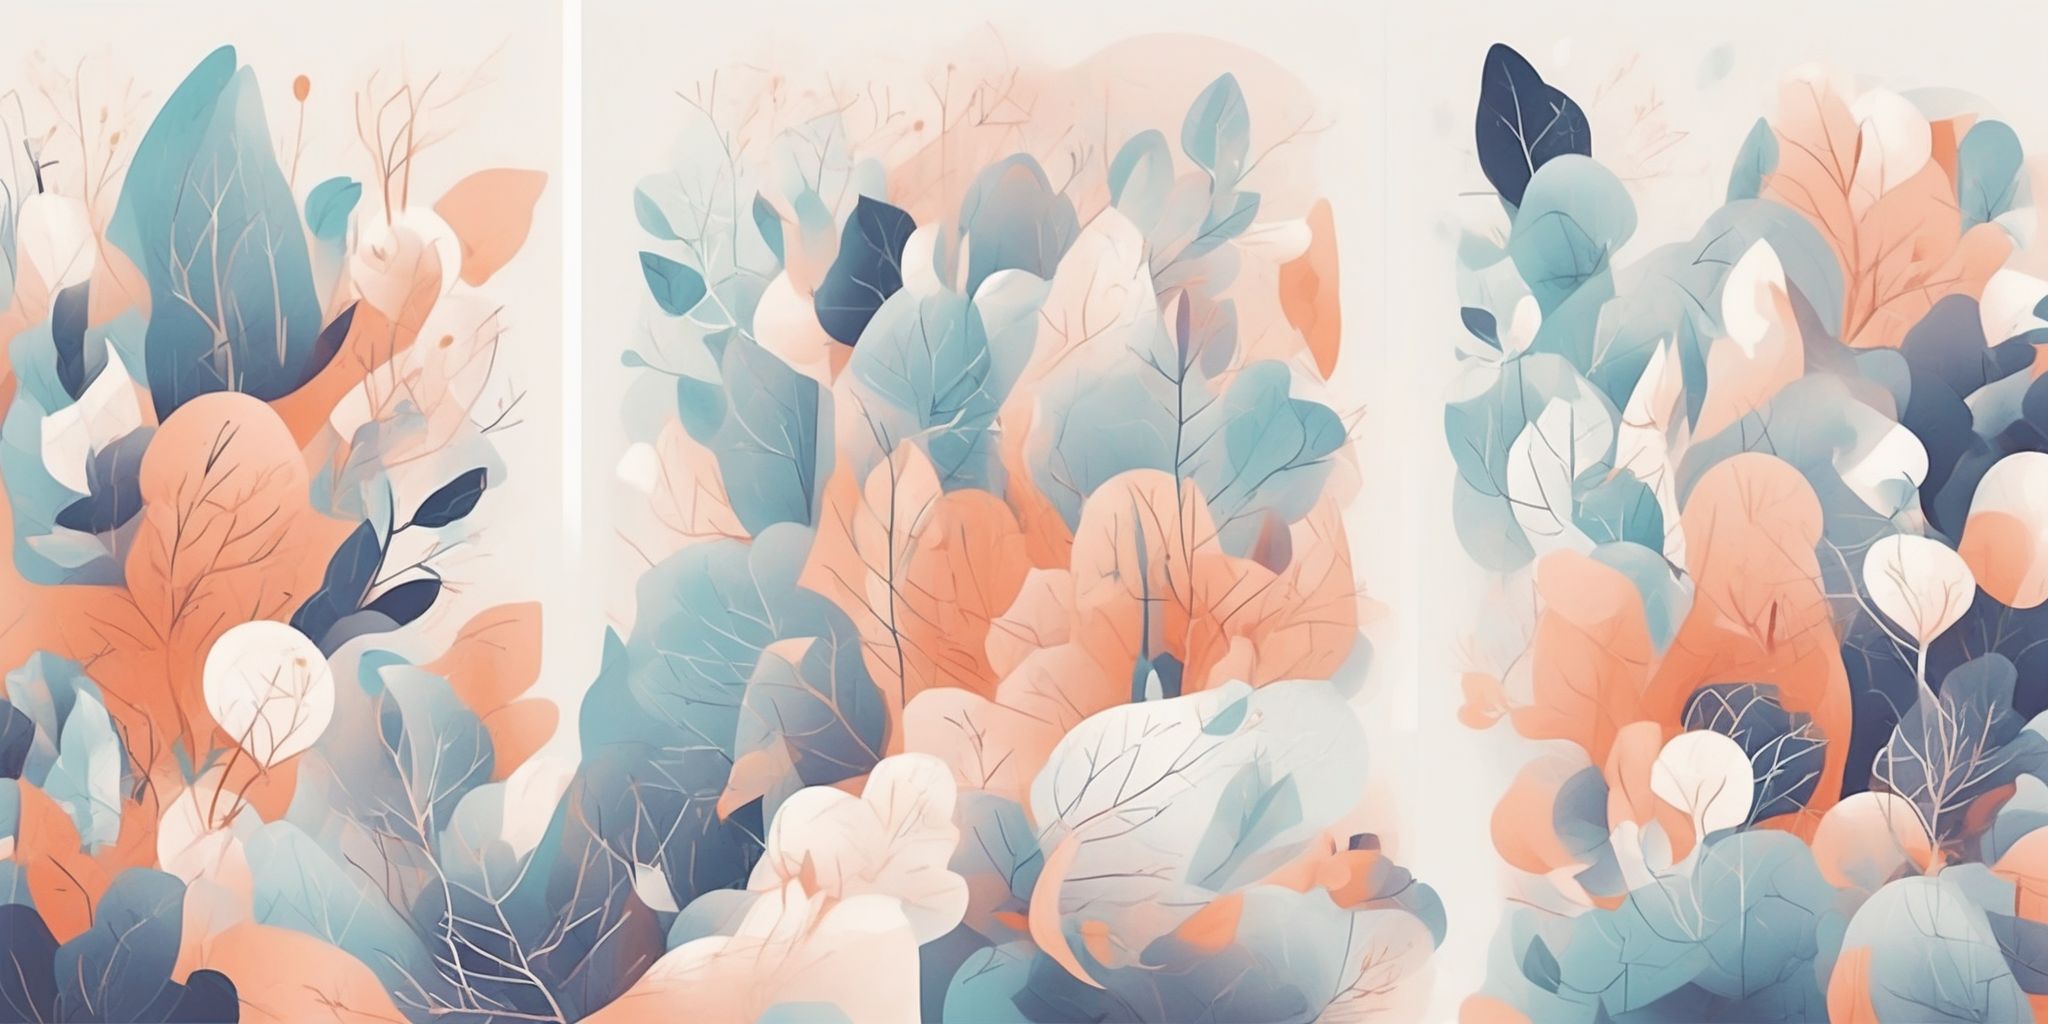 Subtle strategies in illustration style with gradients and white background